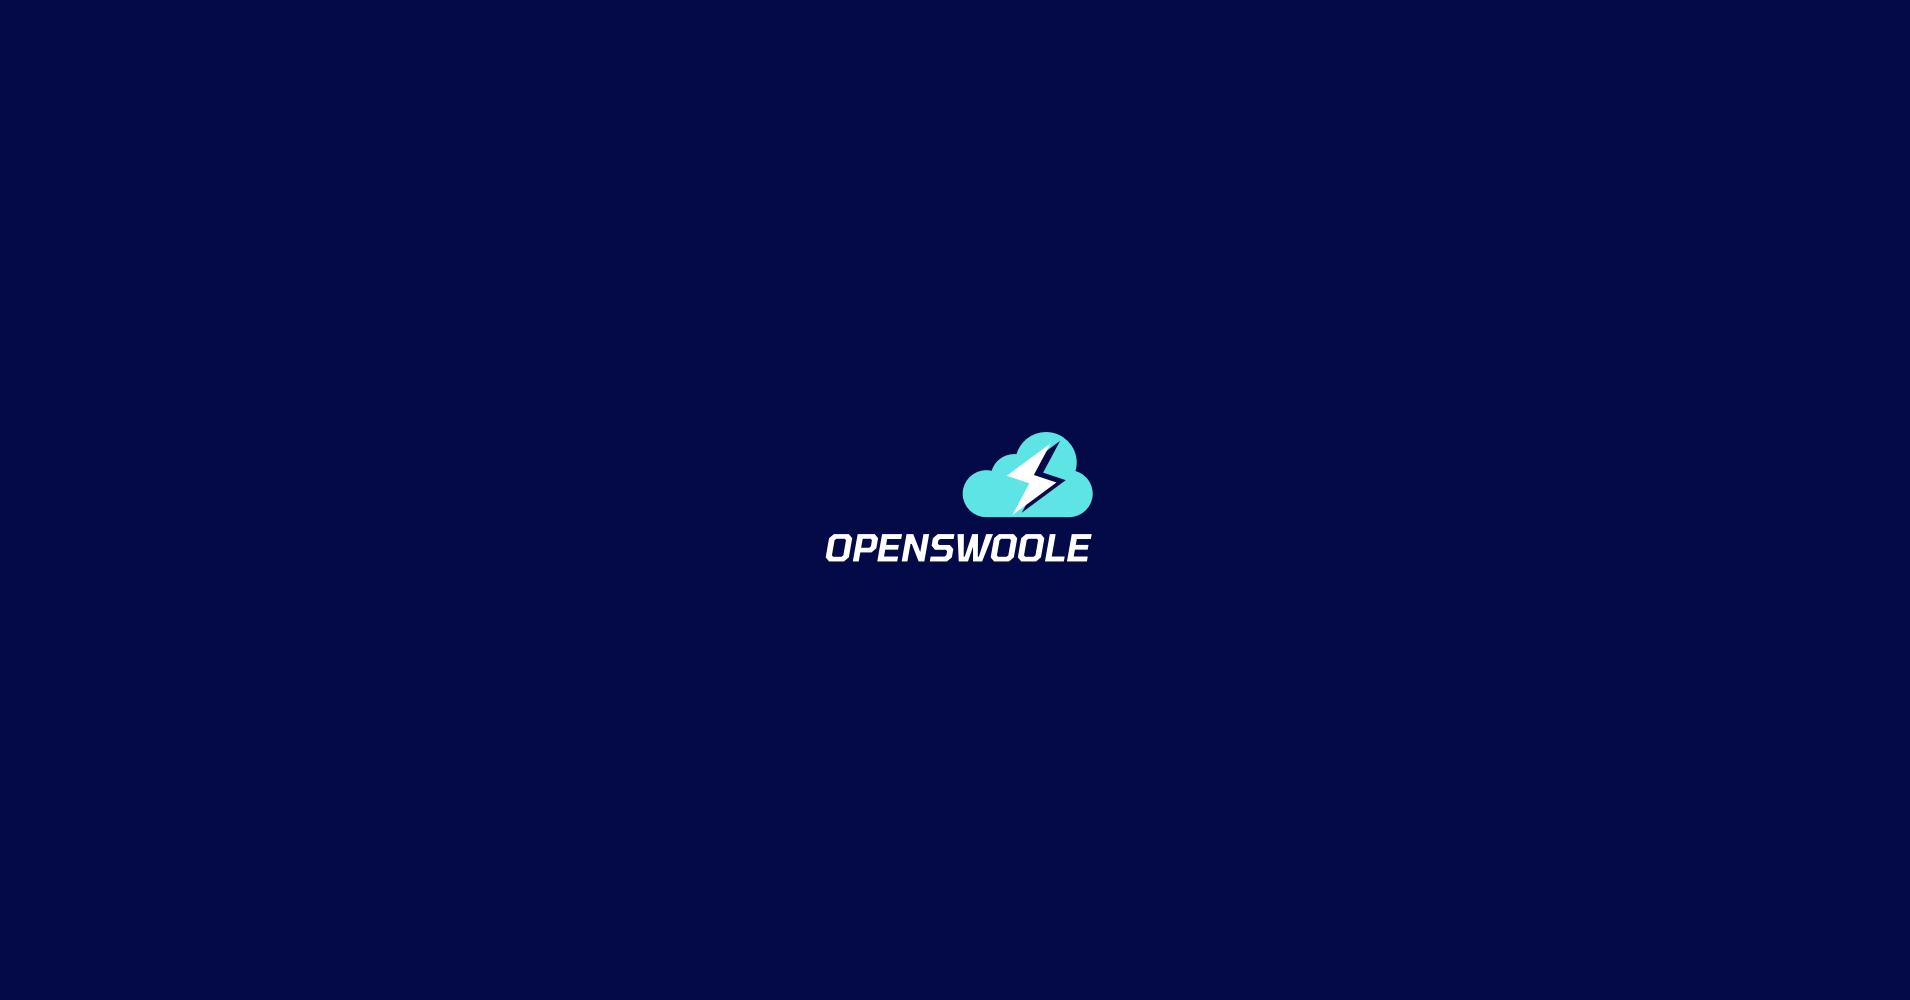 openswoole.com